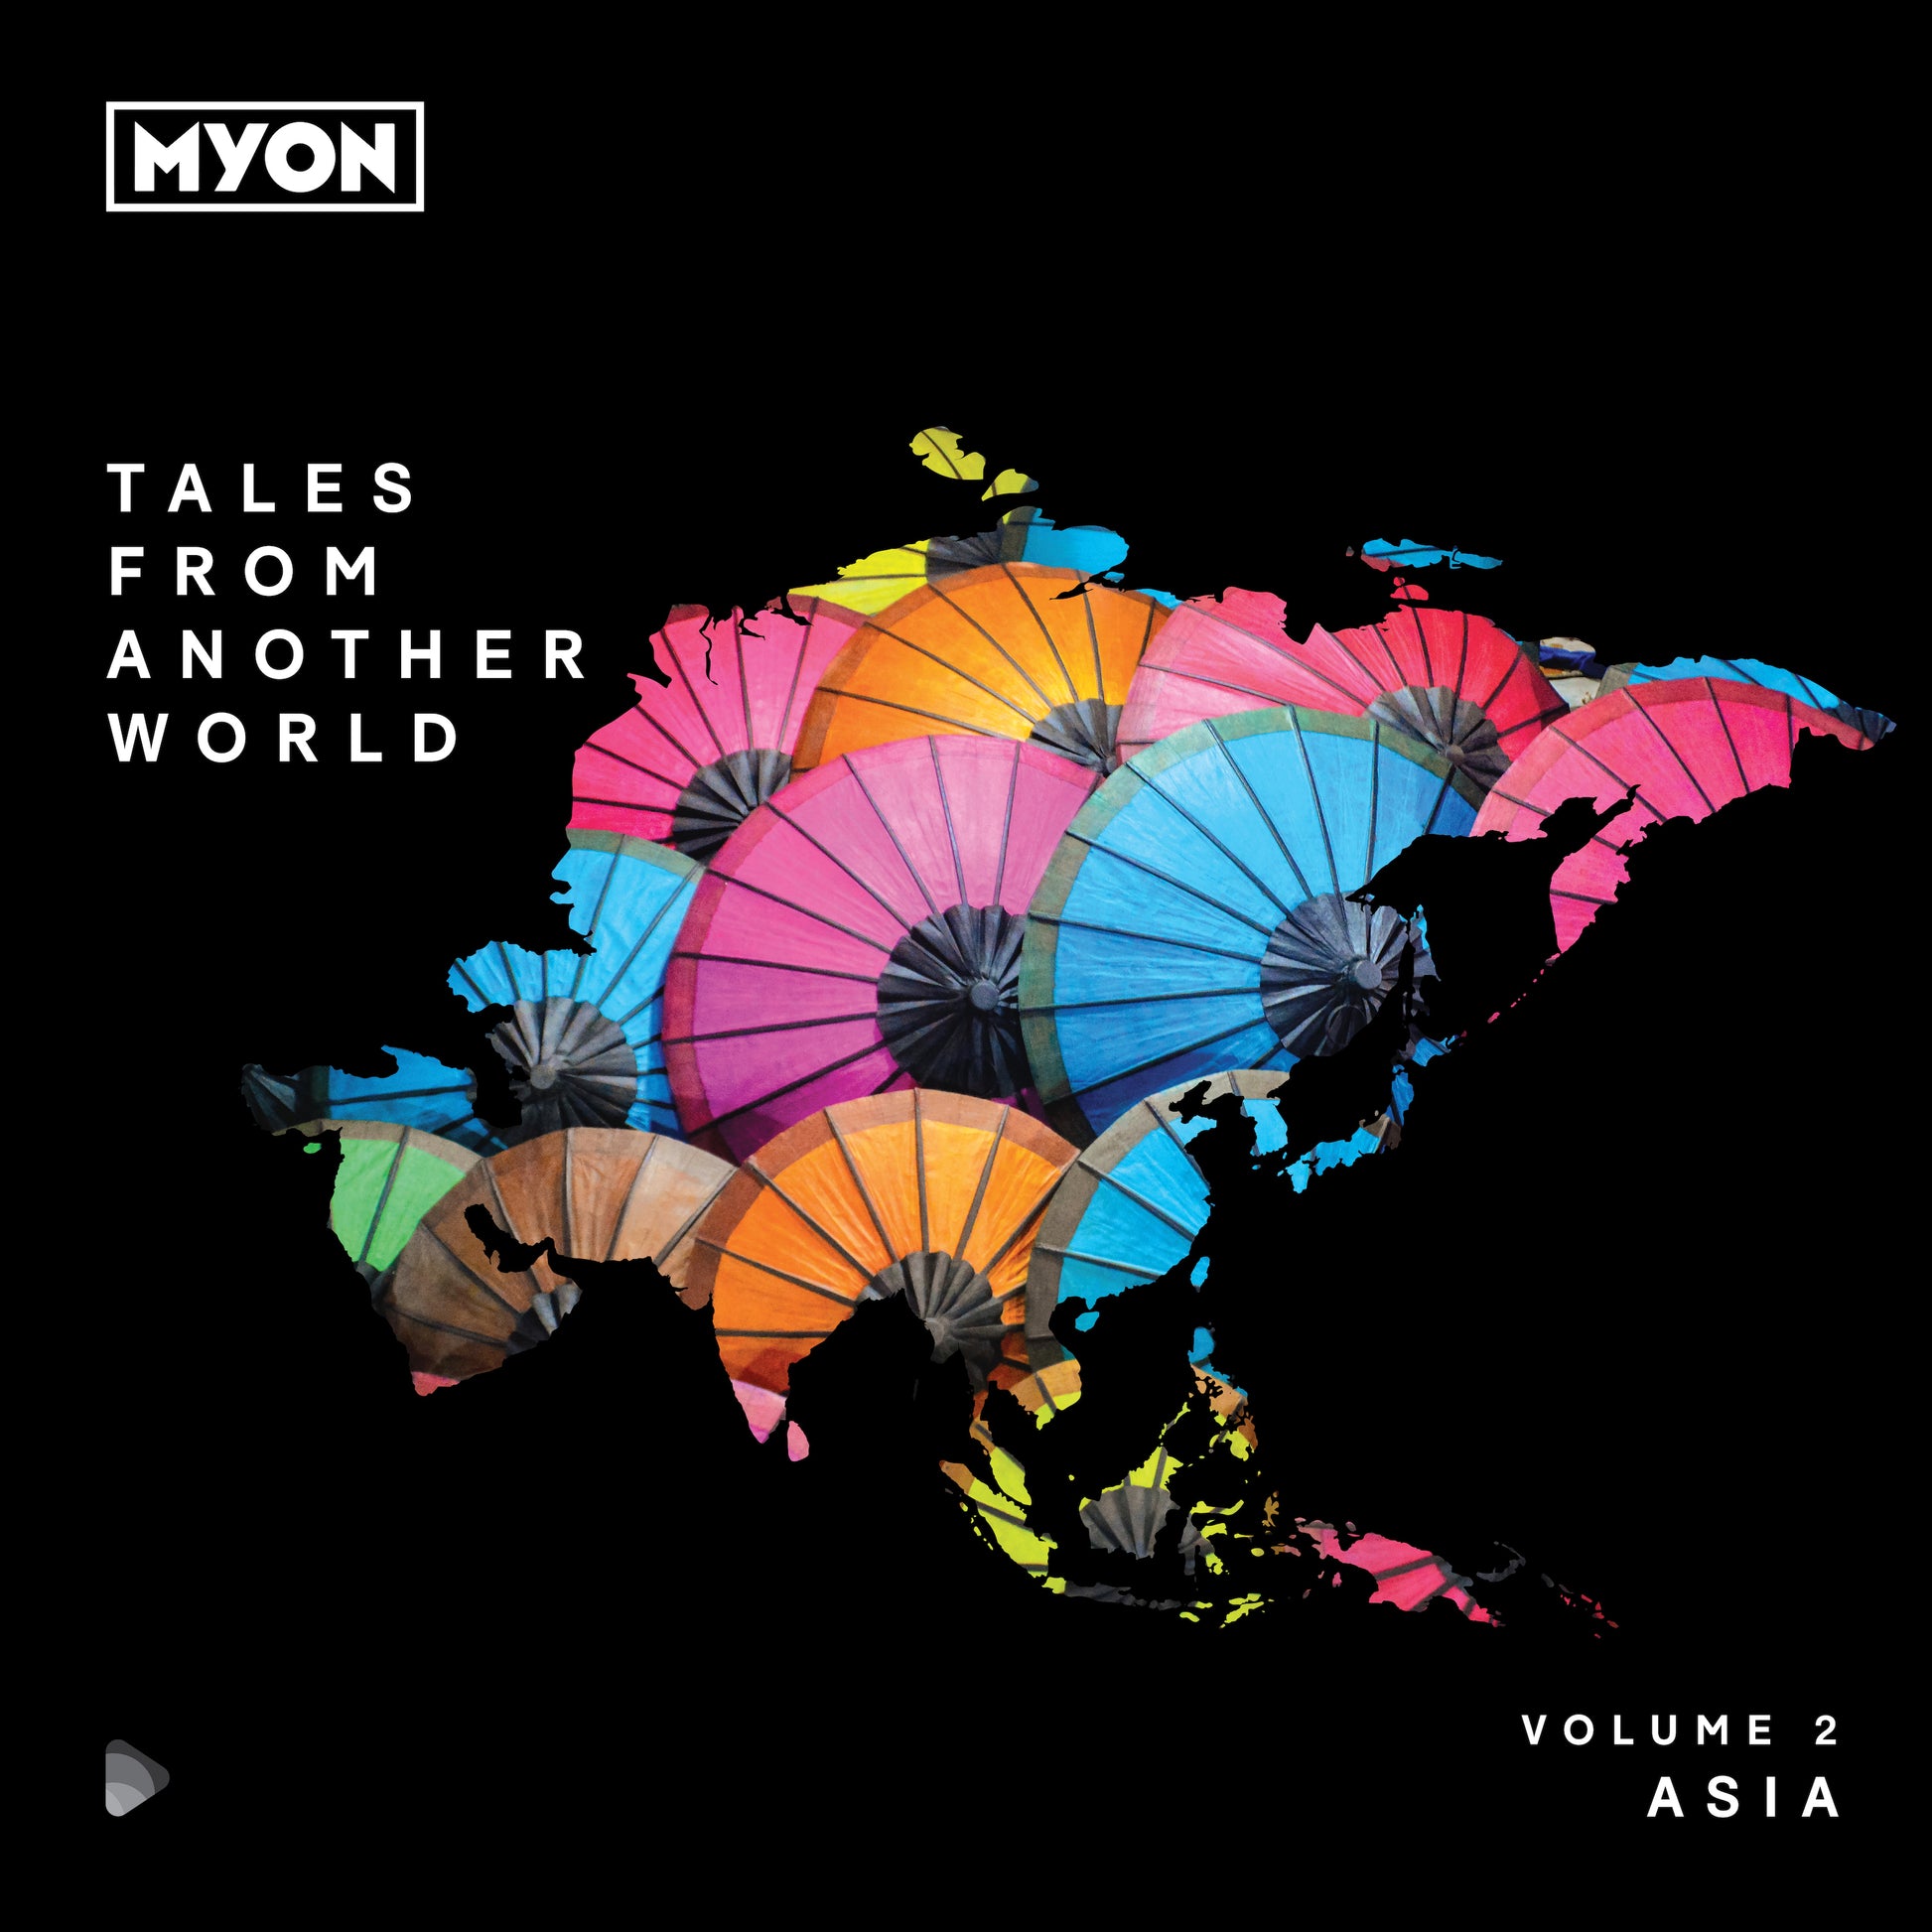 myon tales from another world vol.2 asia